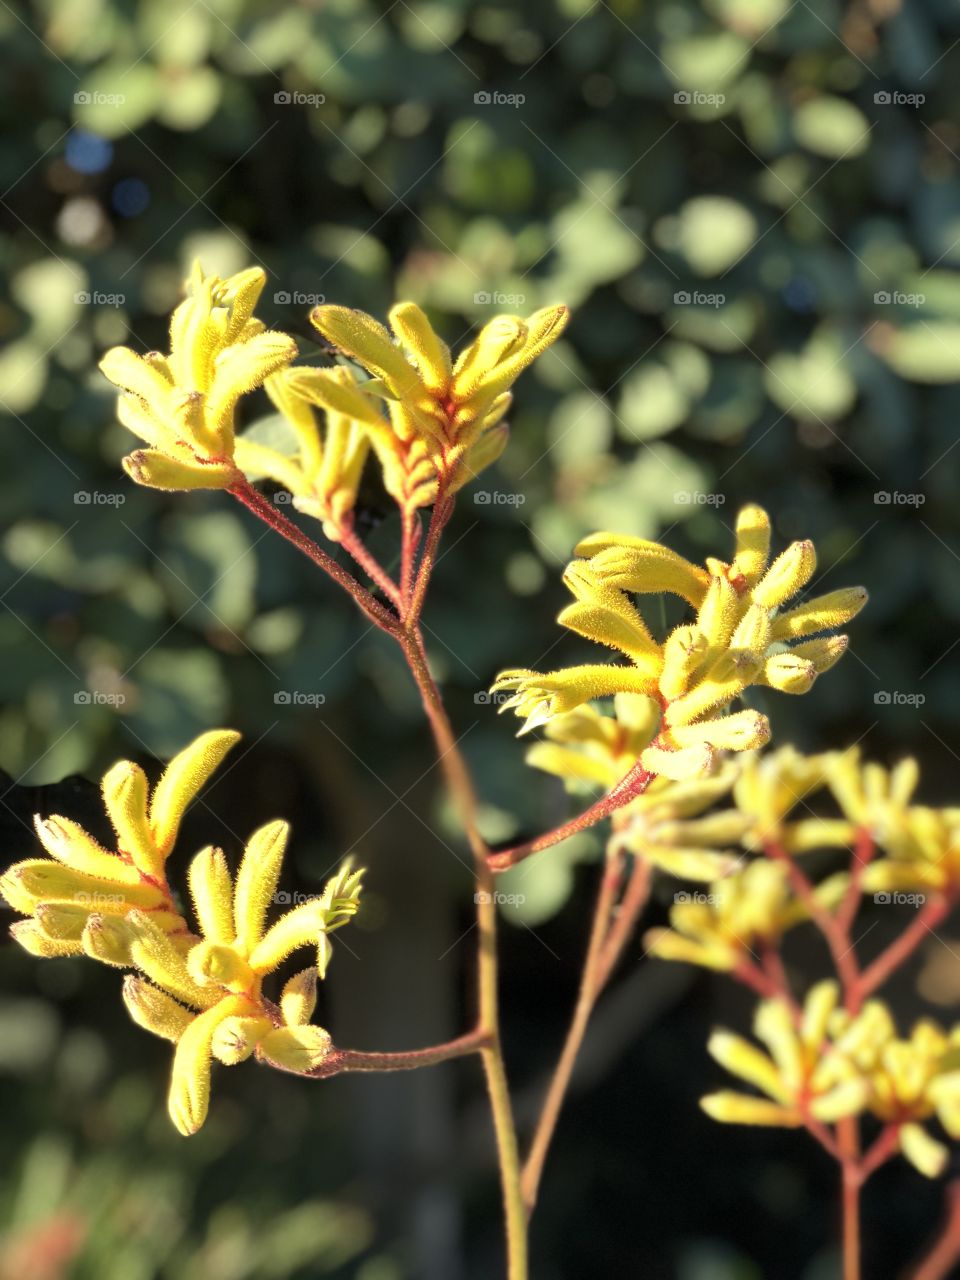 Stunning and Unique Kangaroo Paw Flower. Screensaver or Desktop and Perfect for Canvas Art.